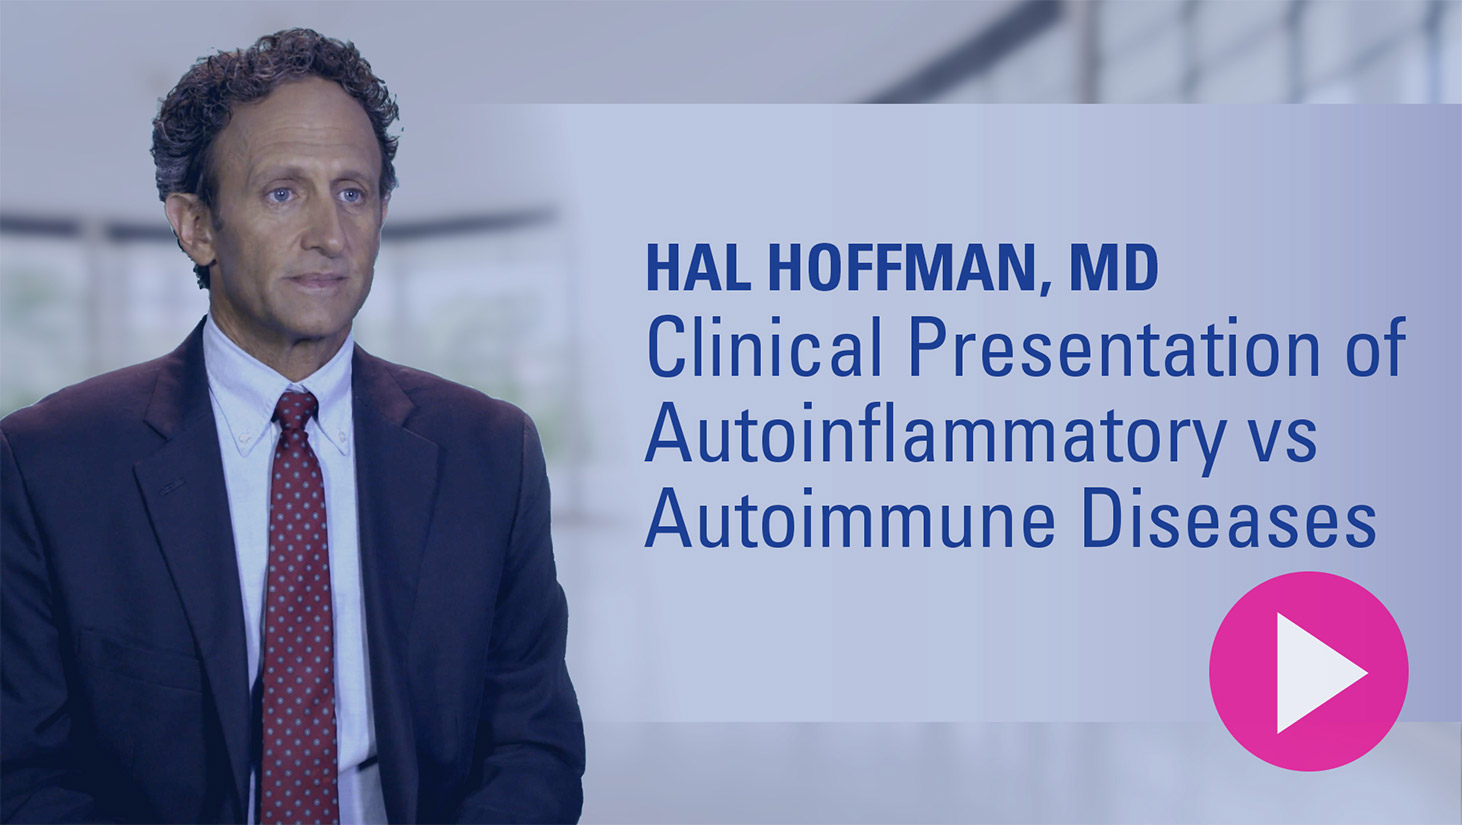 Video thumbnail for Clinical Presentation of Autoinflammatory vs Autoimmune Diseases